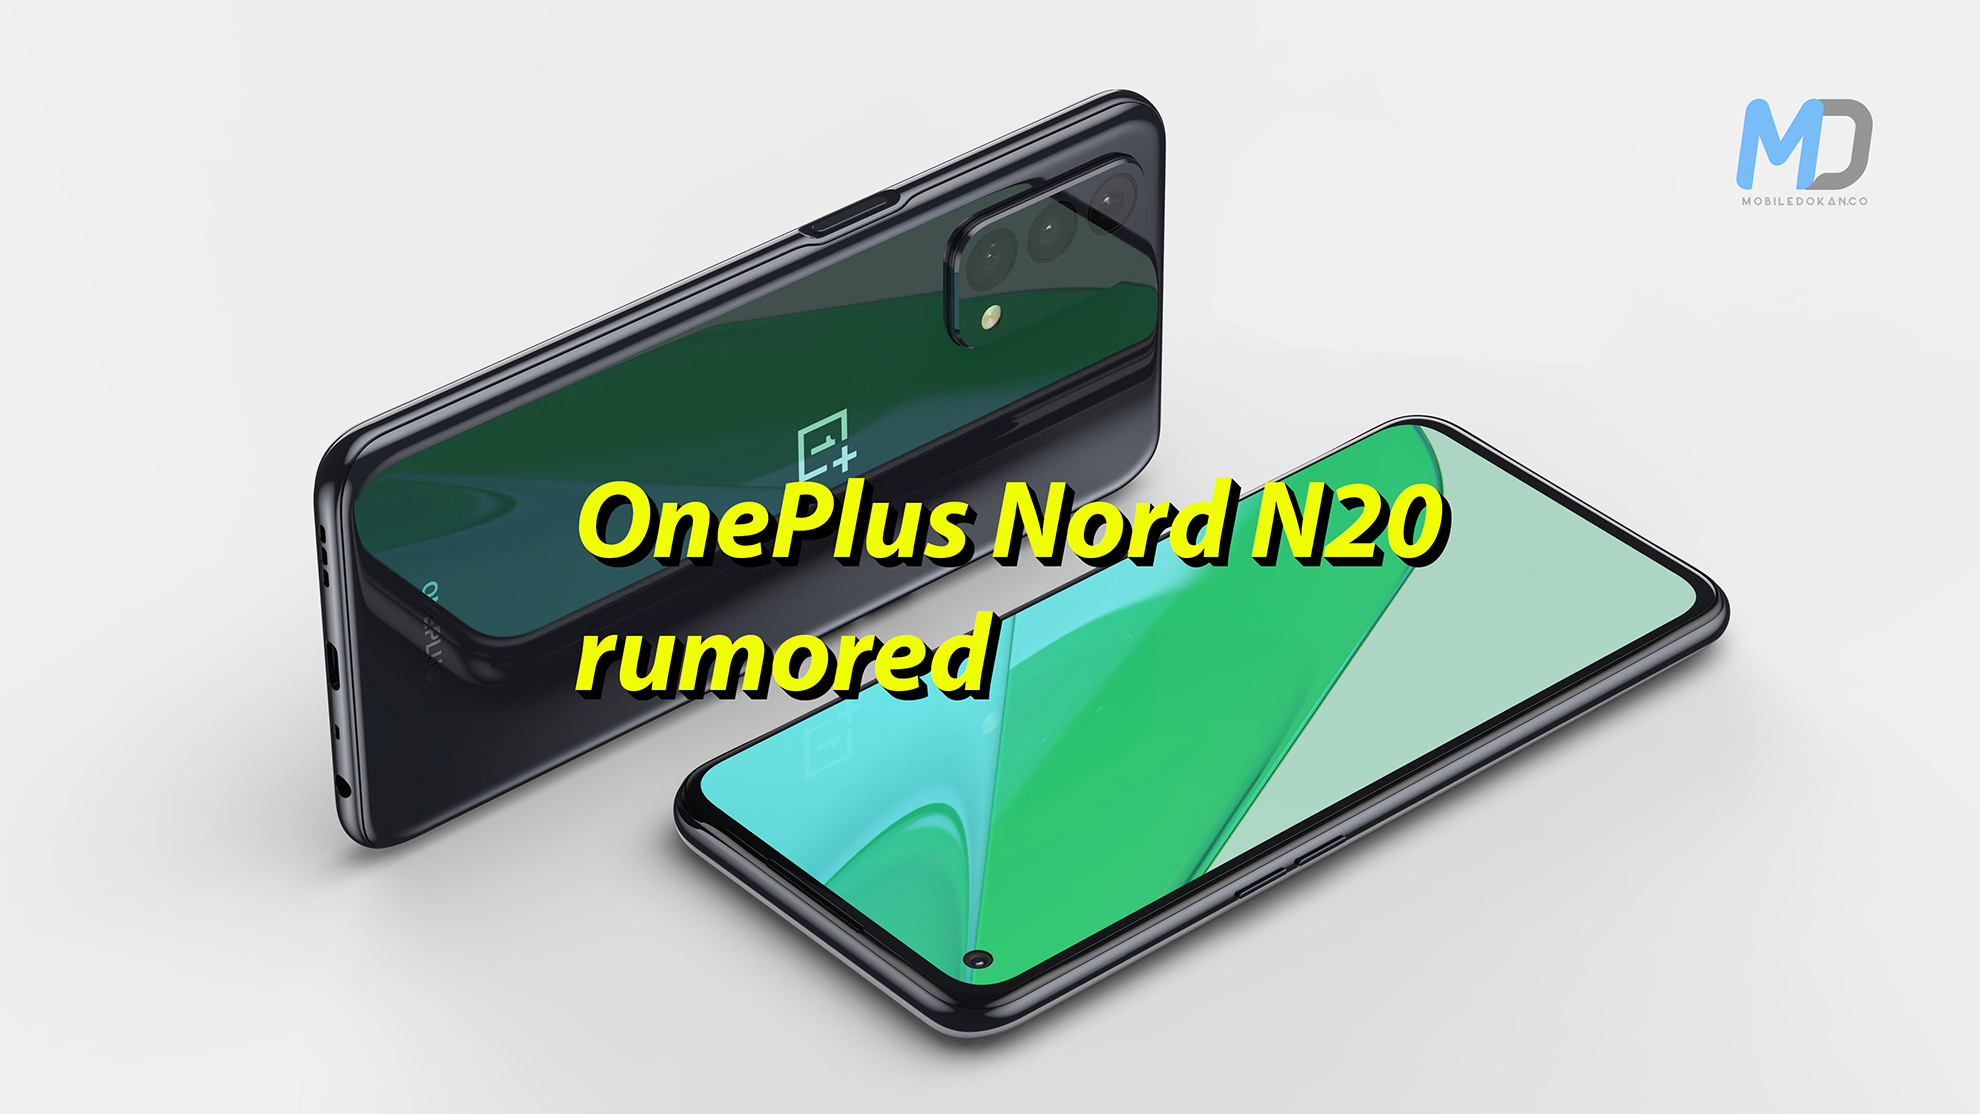 OnePlus Nord N20 rumored with a 6.5-inch Display